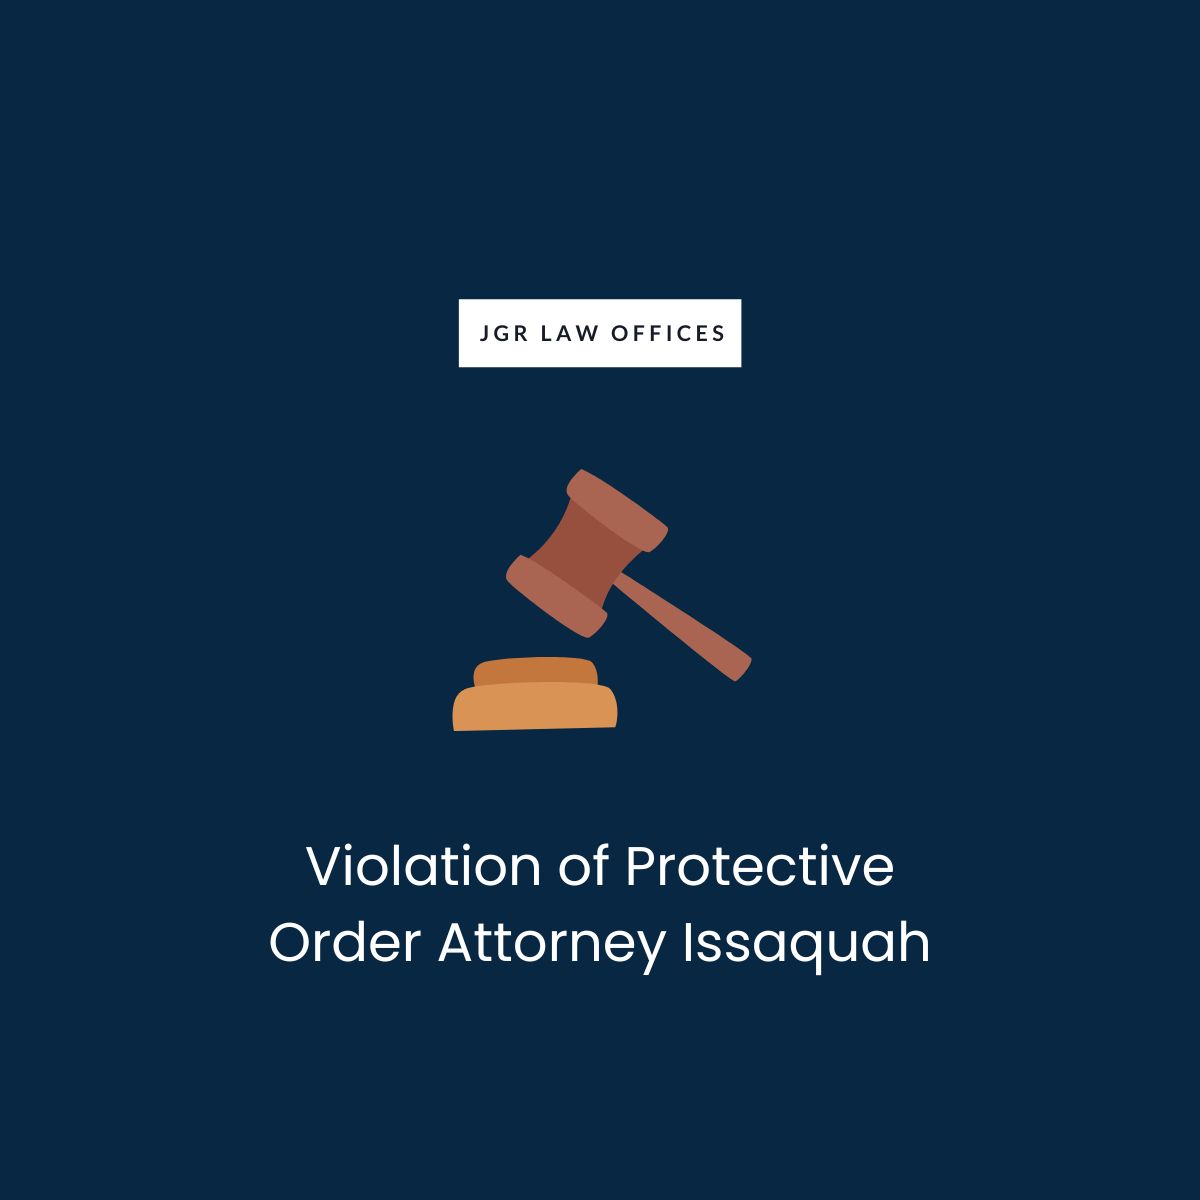 Violation of Protective Order Attorney Issaquah